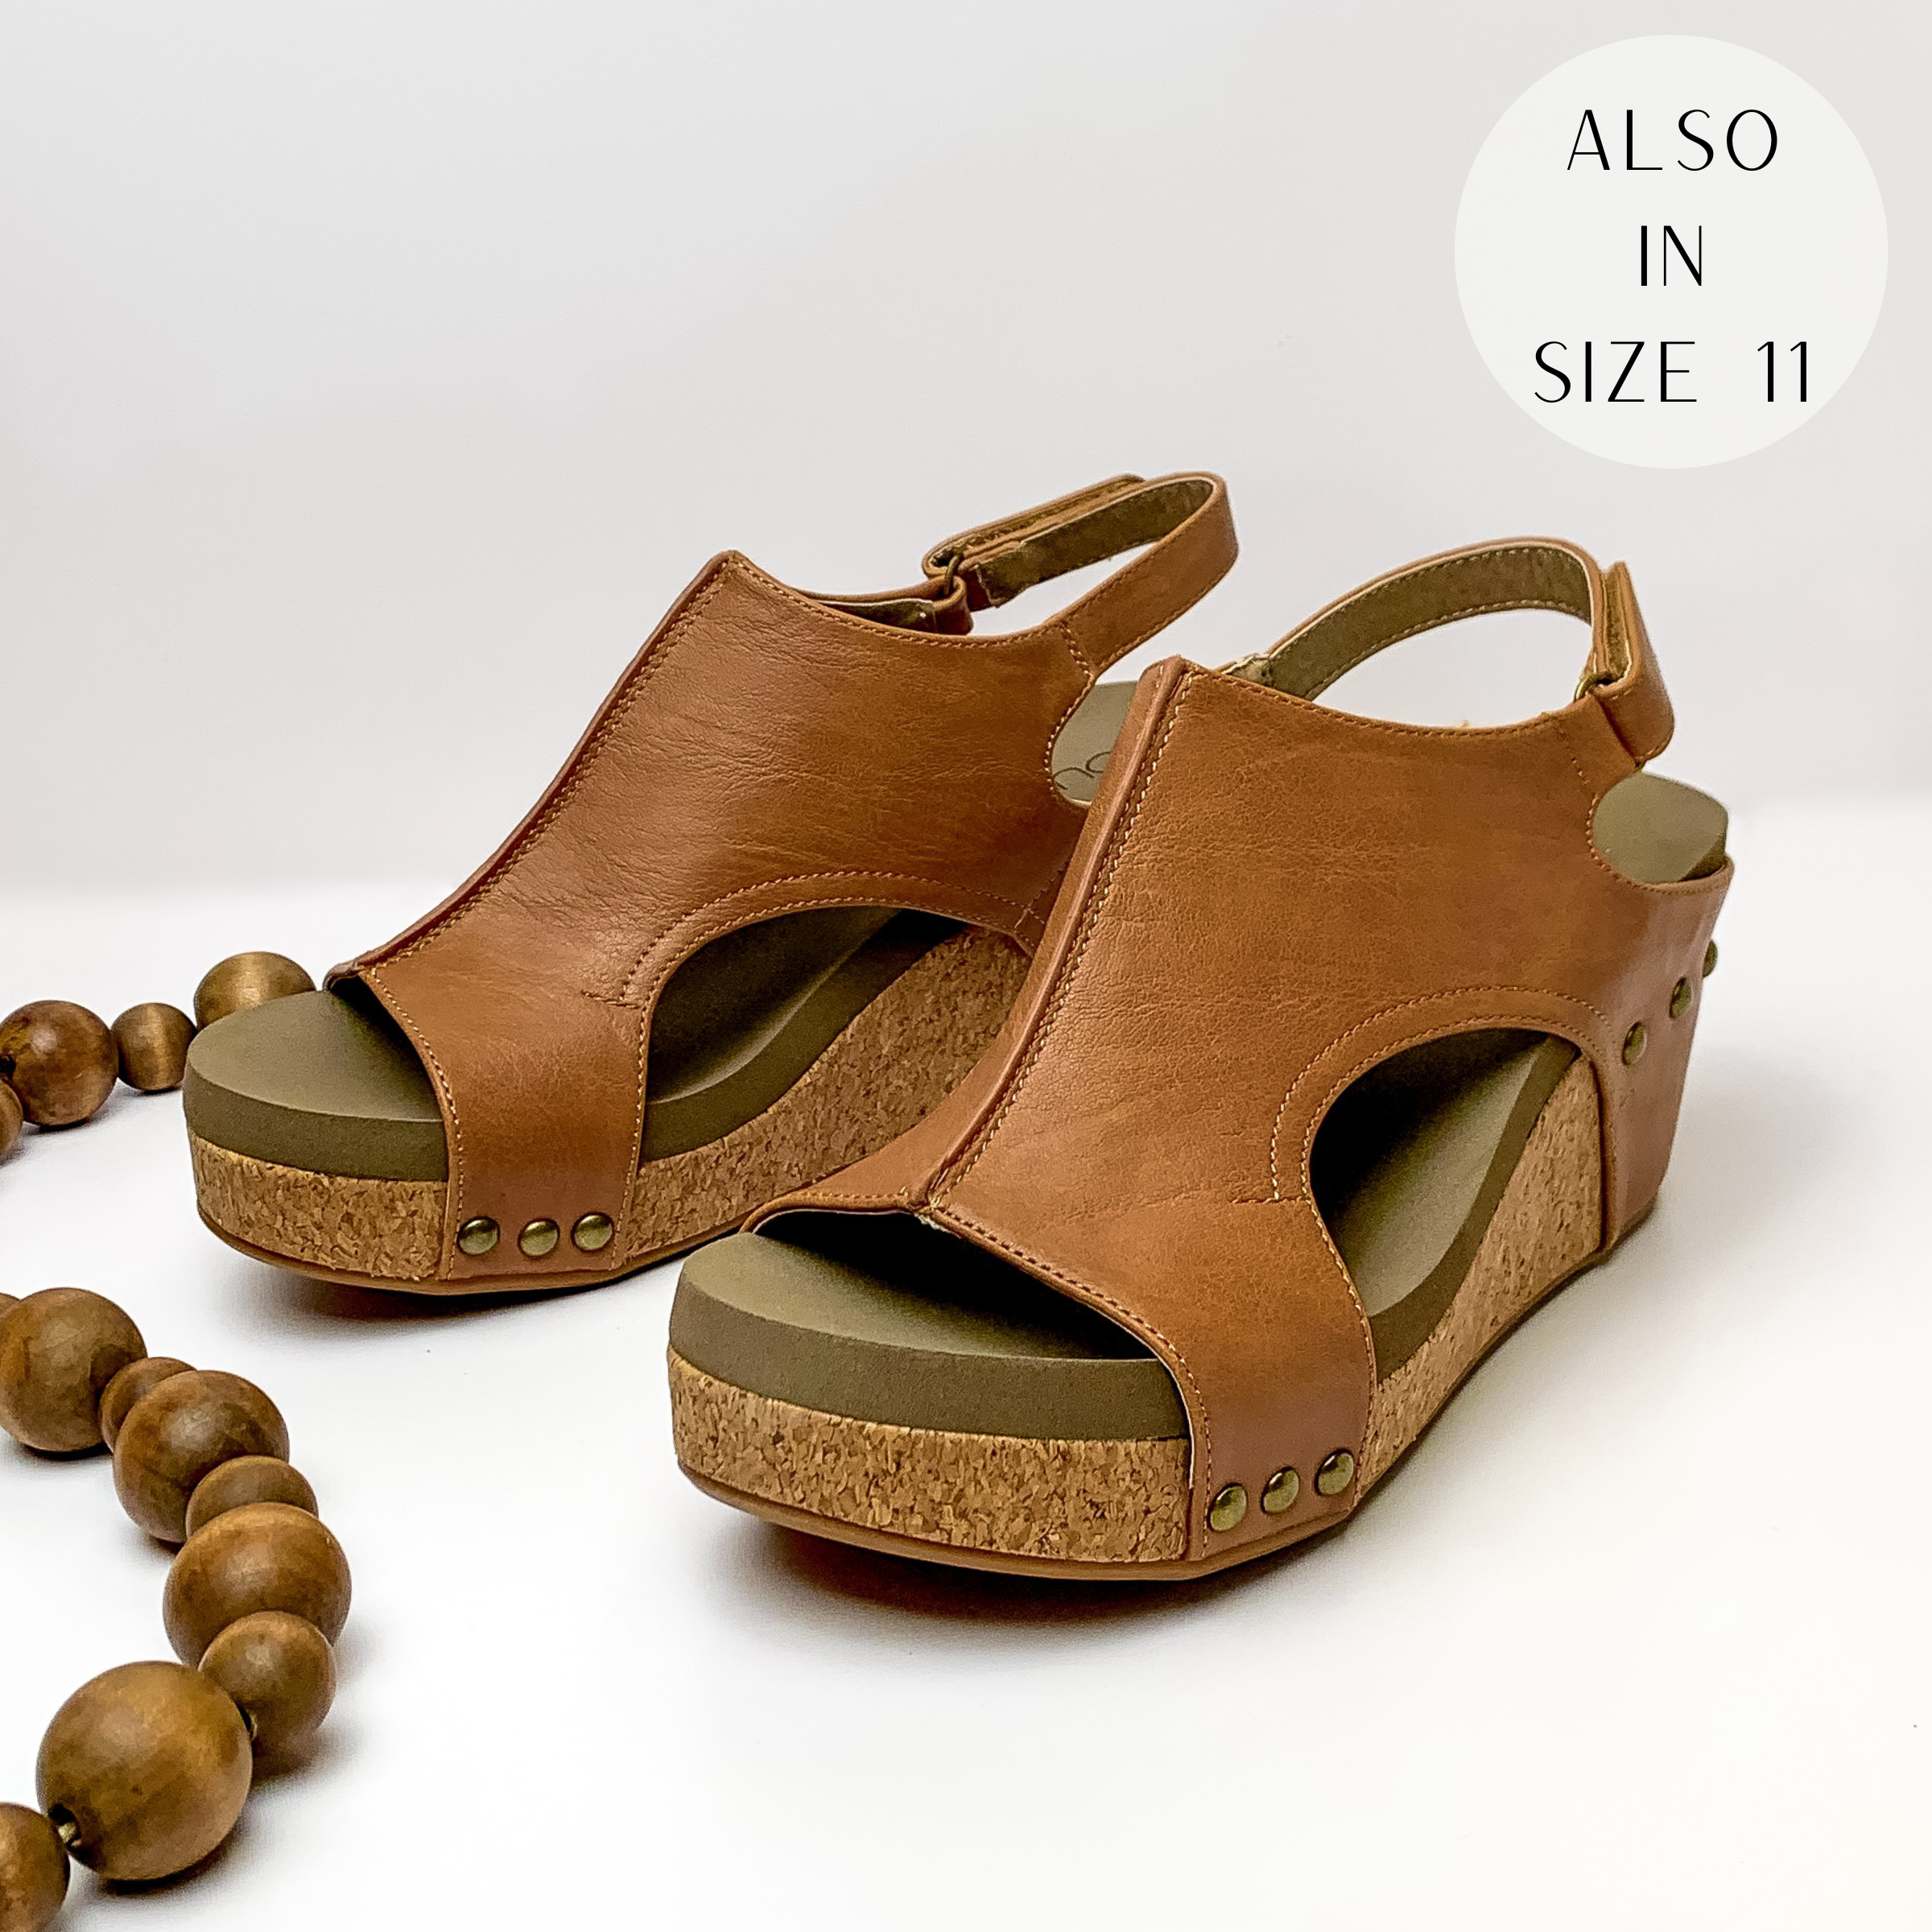 Cork wedges with a cognac color upper with bronze studs connecting the upper to the wedge. These wedges also include a velco strap. These wedges are pictured on a white background with brown beads on the left side of the boots.